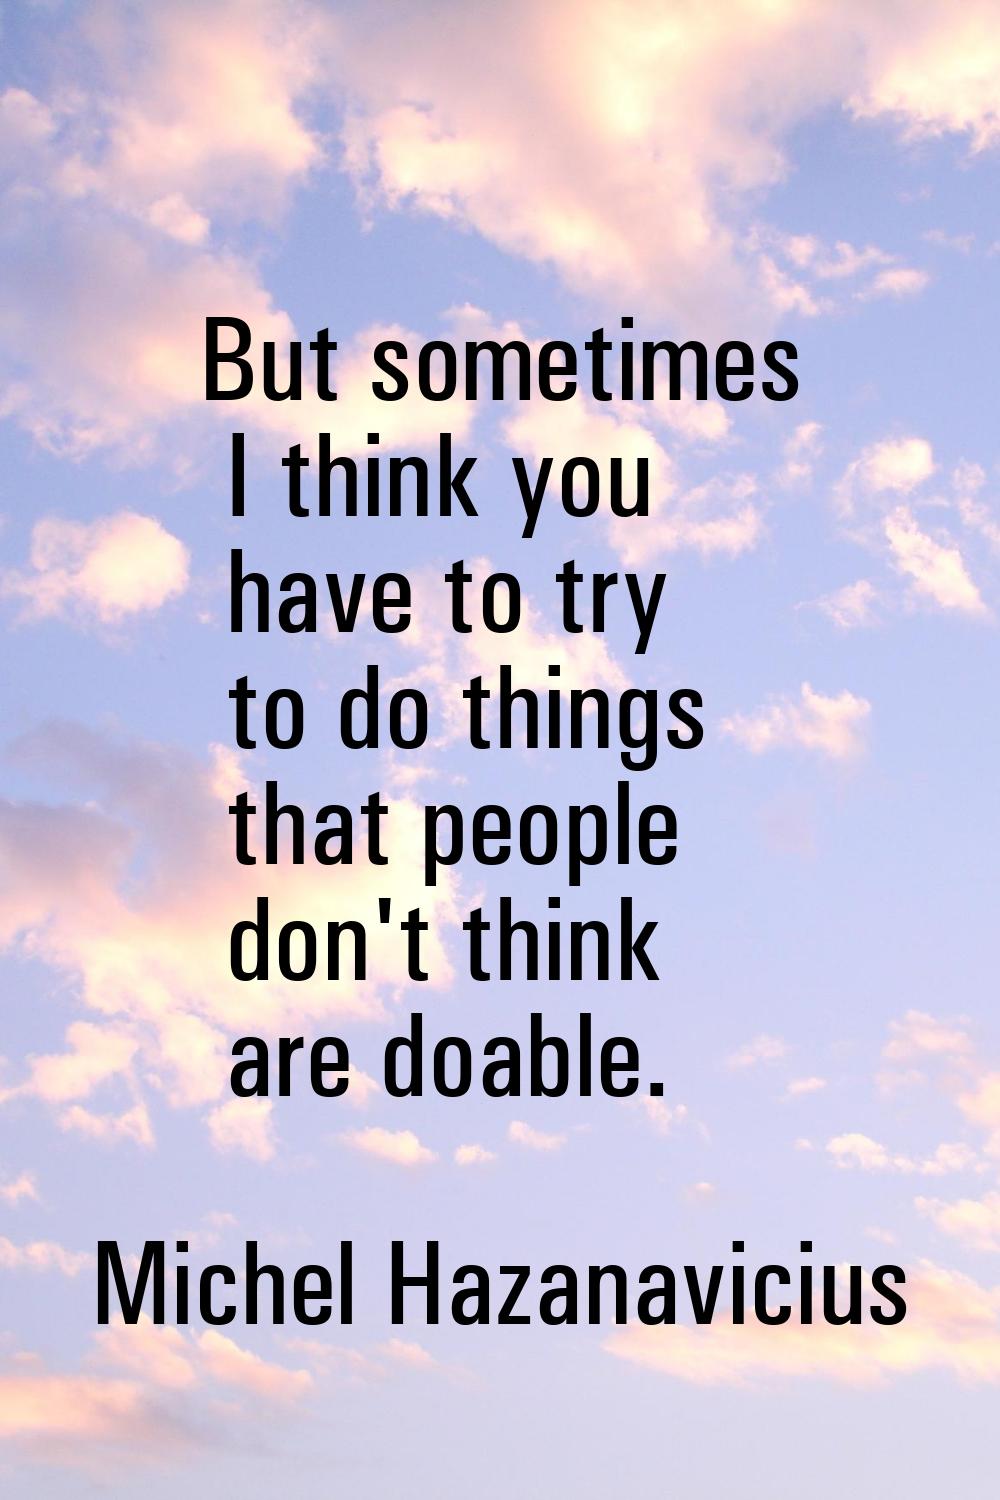 But sometimes I think you have to try to do things that people don't think are doable.